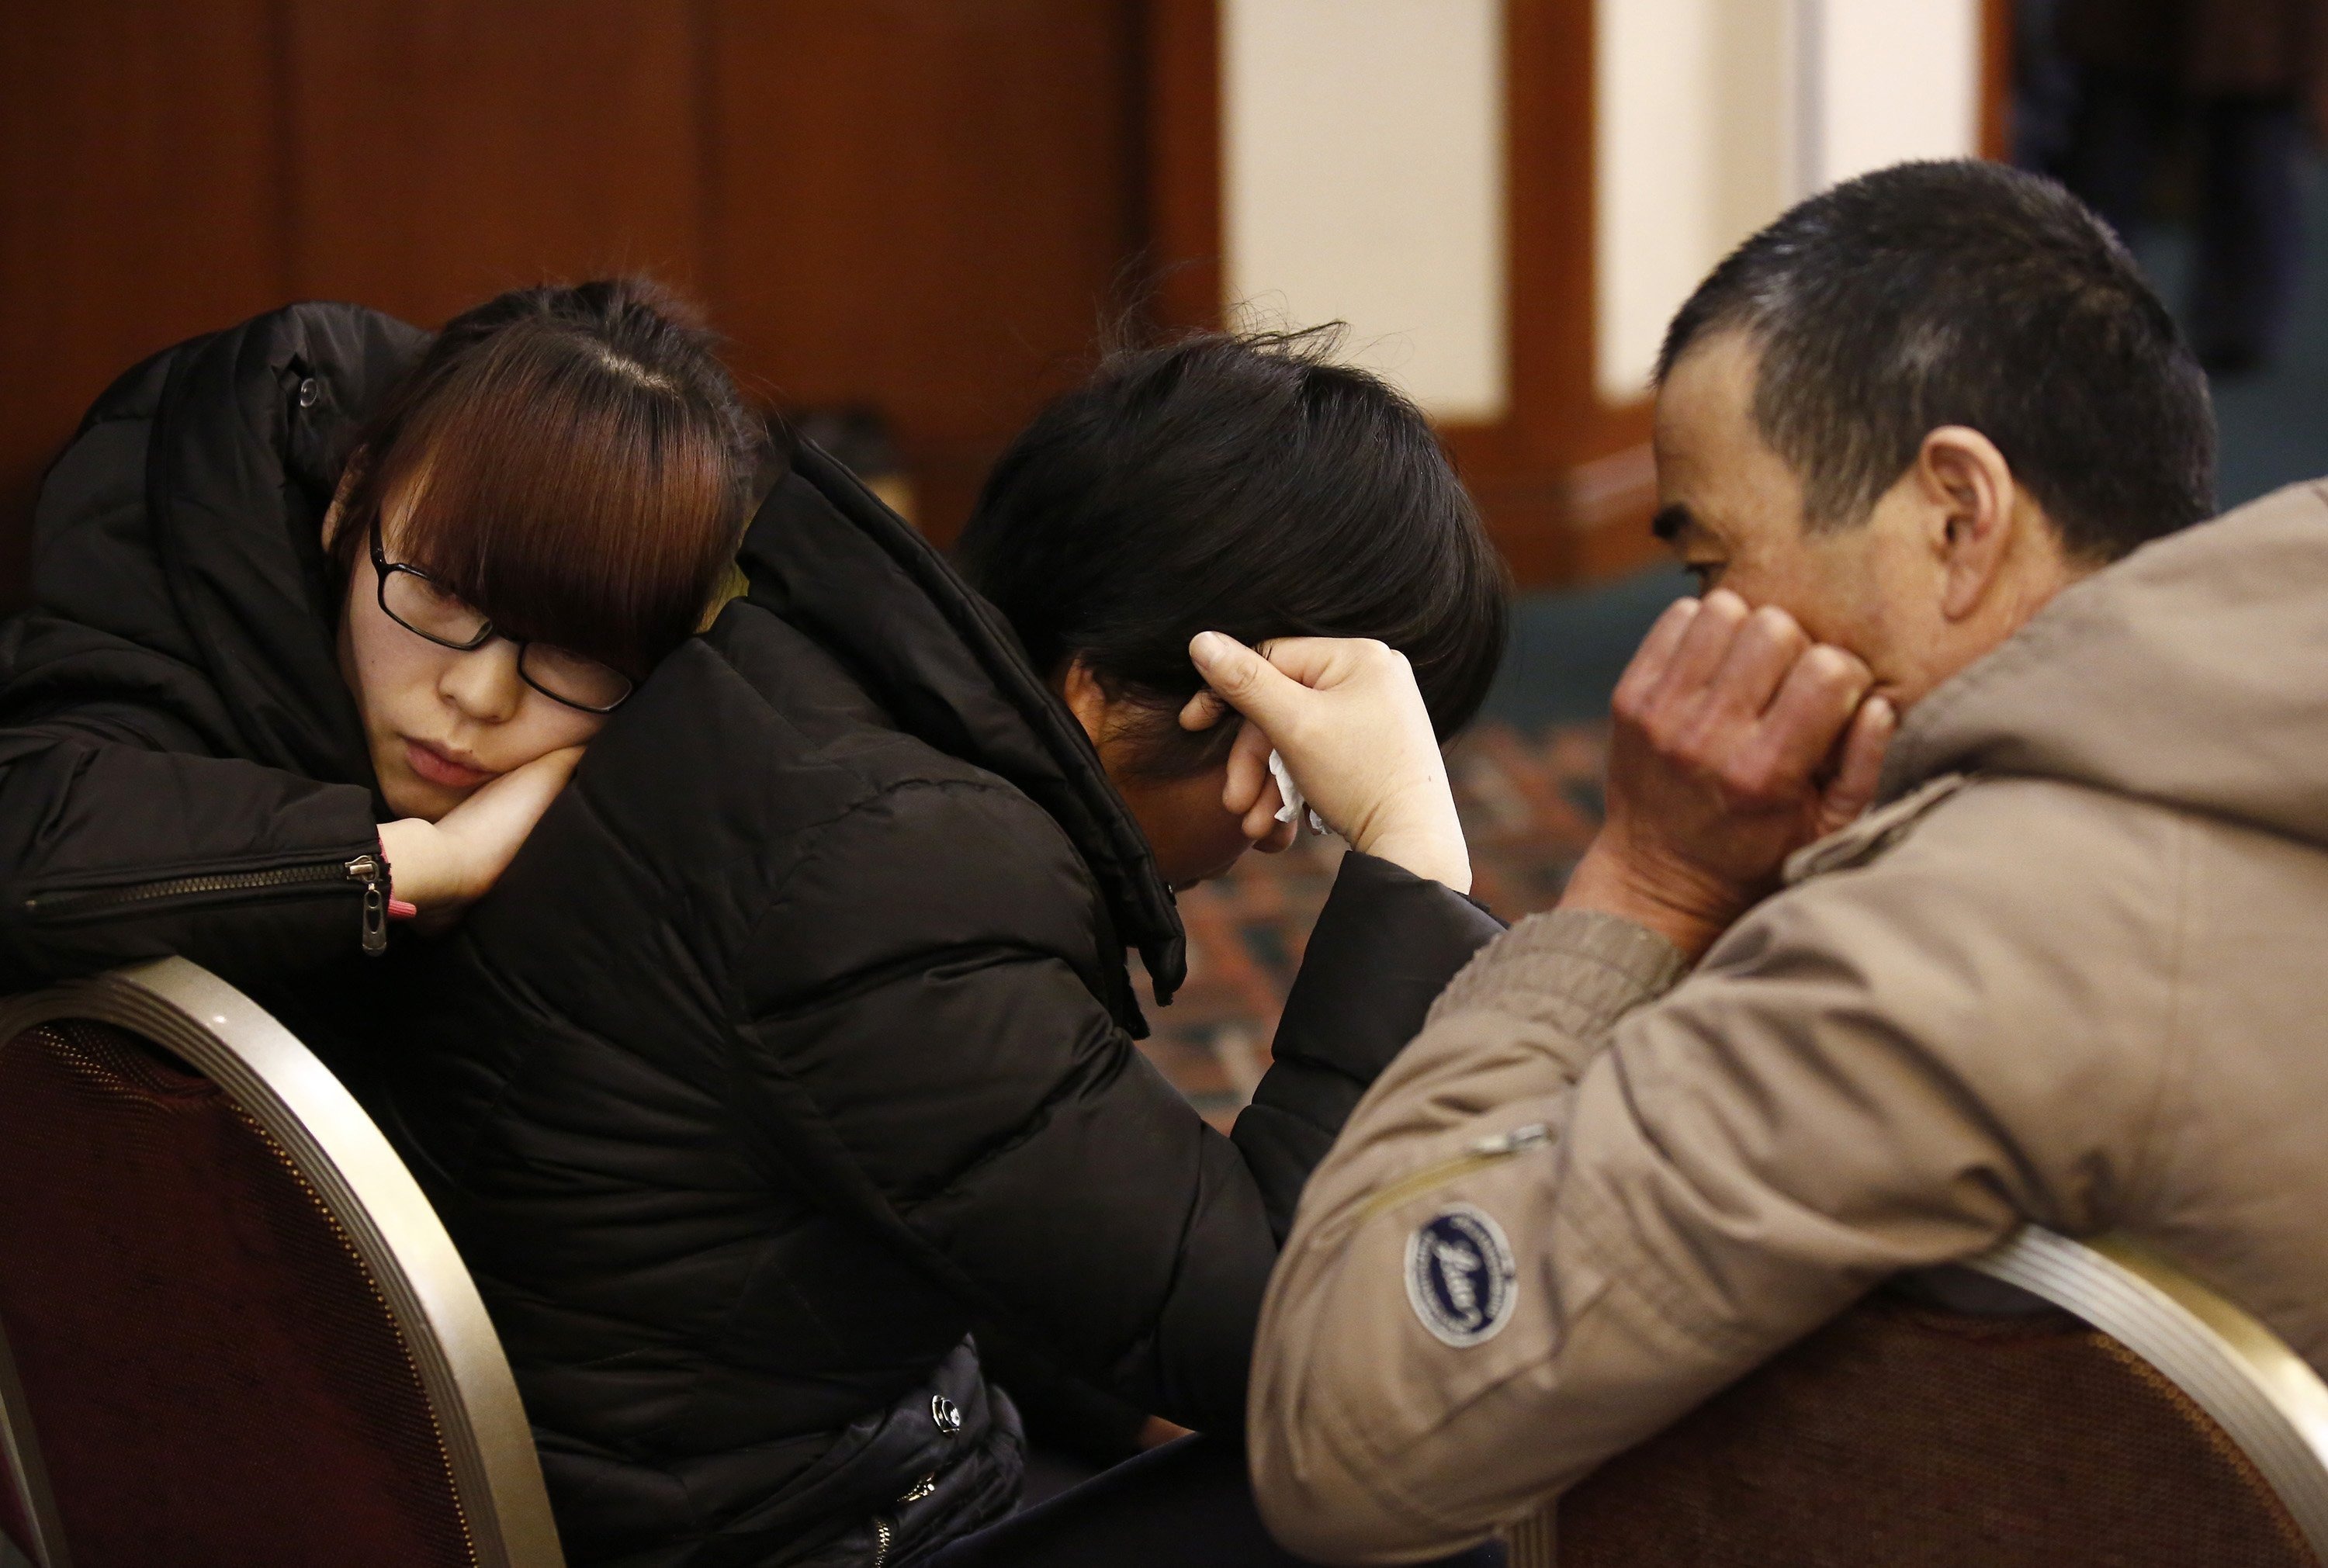 Family members of a passenger onboard the missing Malaysia Airlines Flight 370 react as they listen to a briefing from the airline company at a hotel in Beijing on March 18, 2014 (Kim Kyung-Hoon&mdash;Reuters)